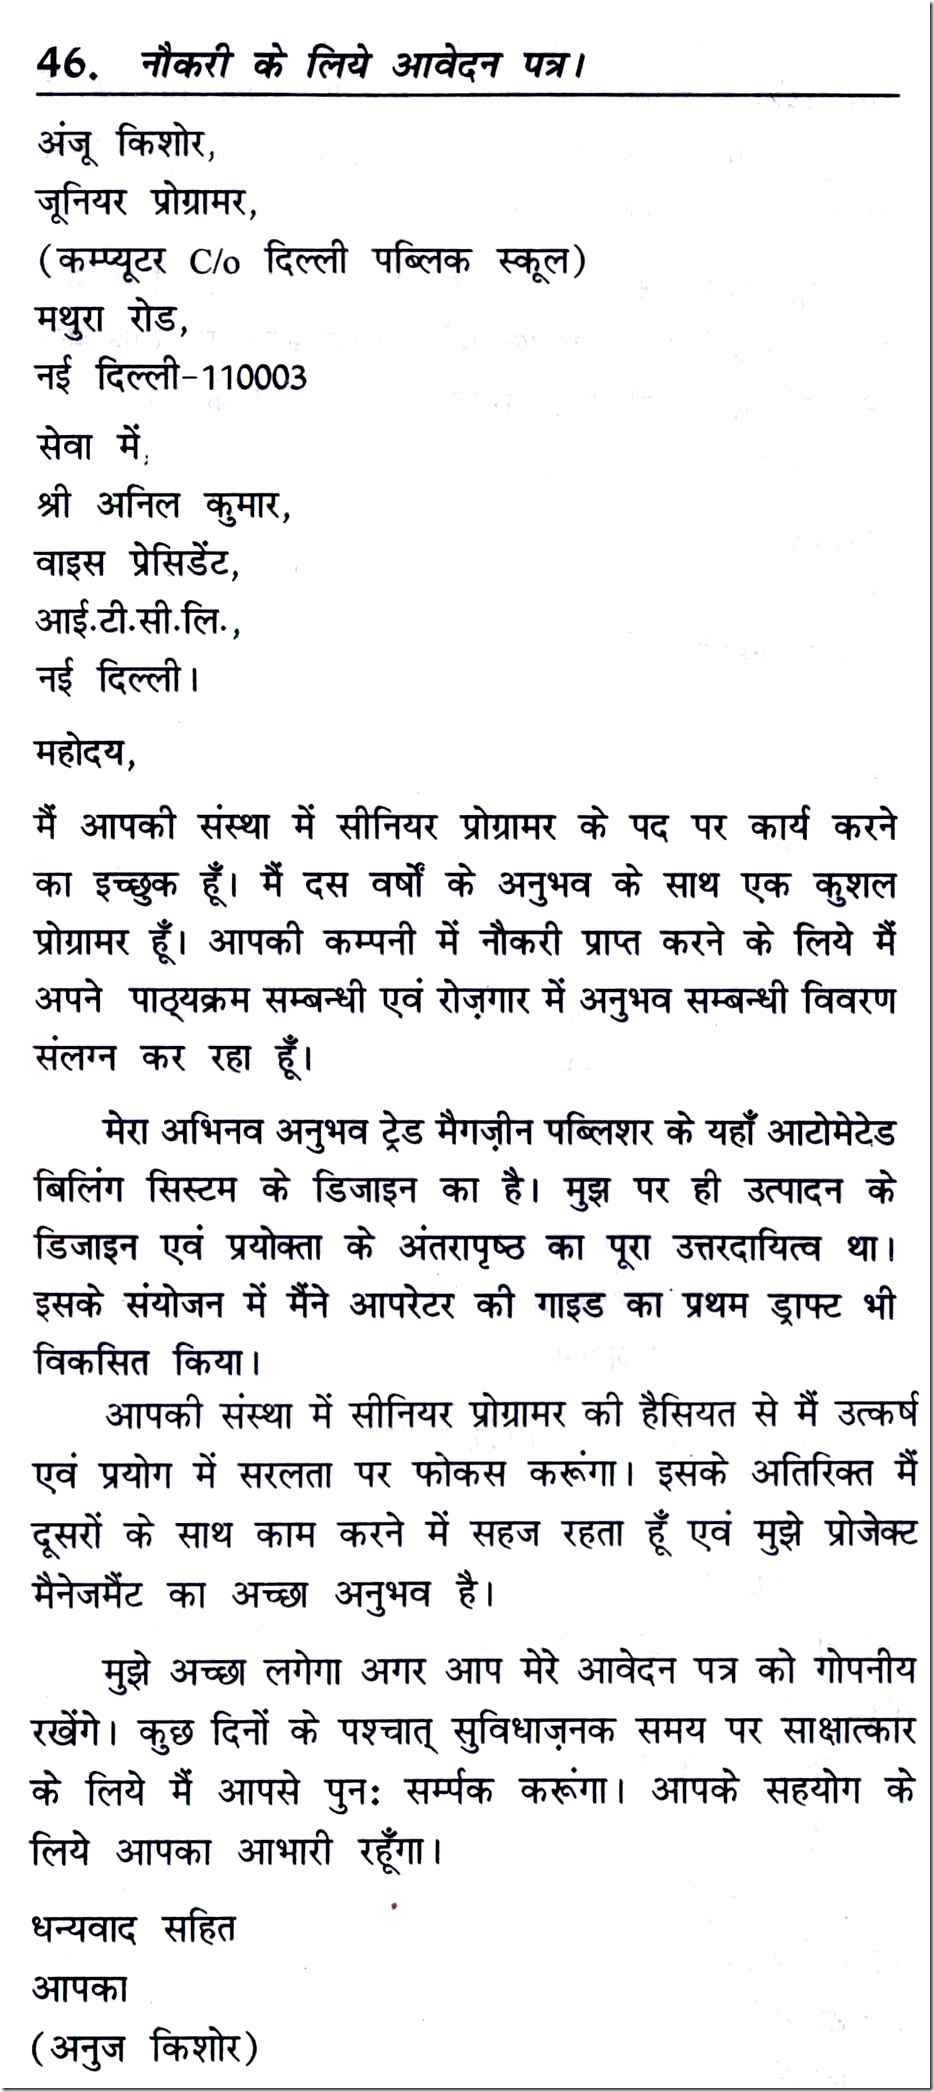 Application Letter For A Job In Hindi